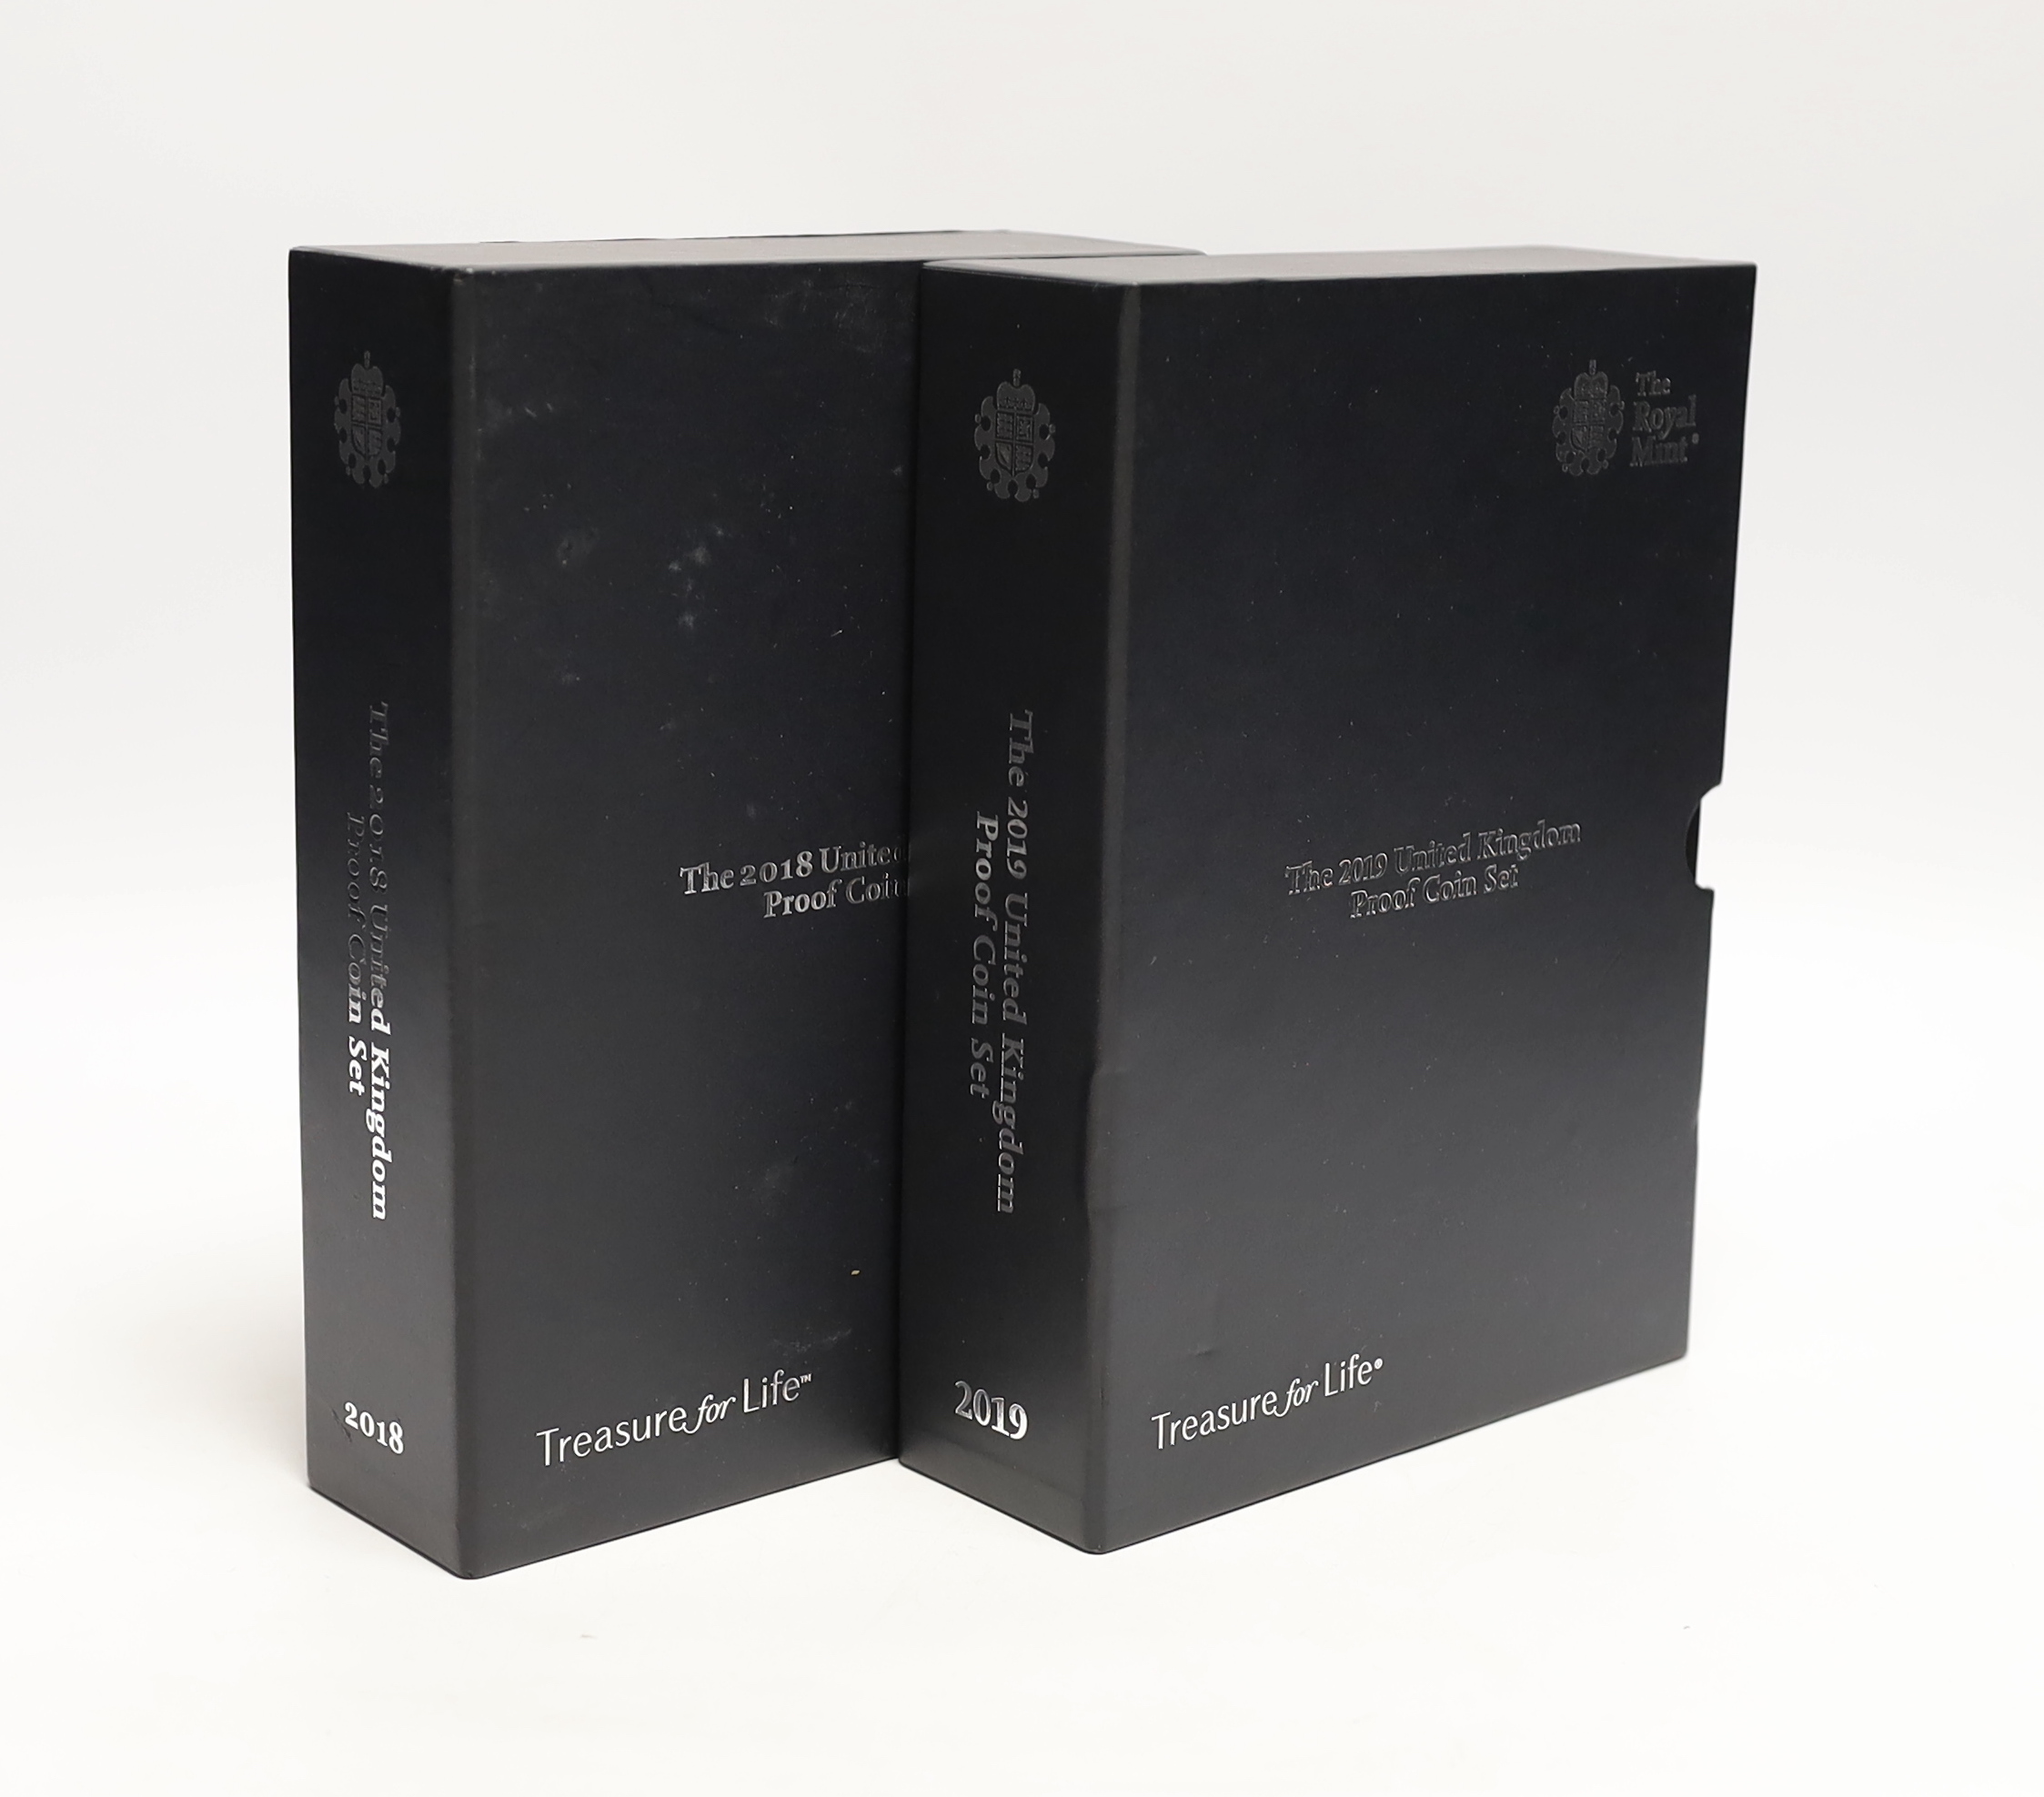 Two Royal Mint UK QEII Proof coin sets for 2018 and 2019, each containing definitive and commemorative coins, 2 cases                                                                                                       